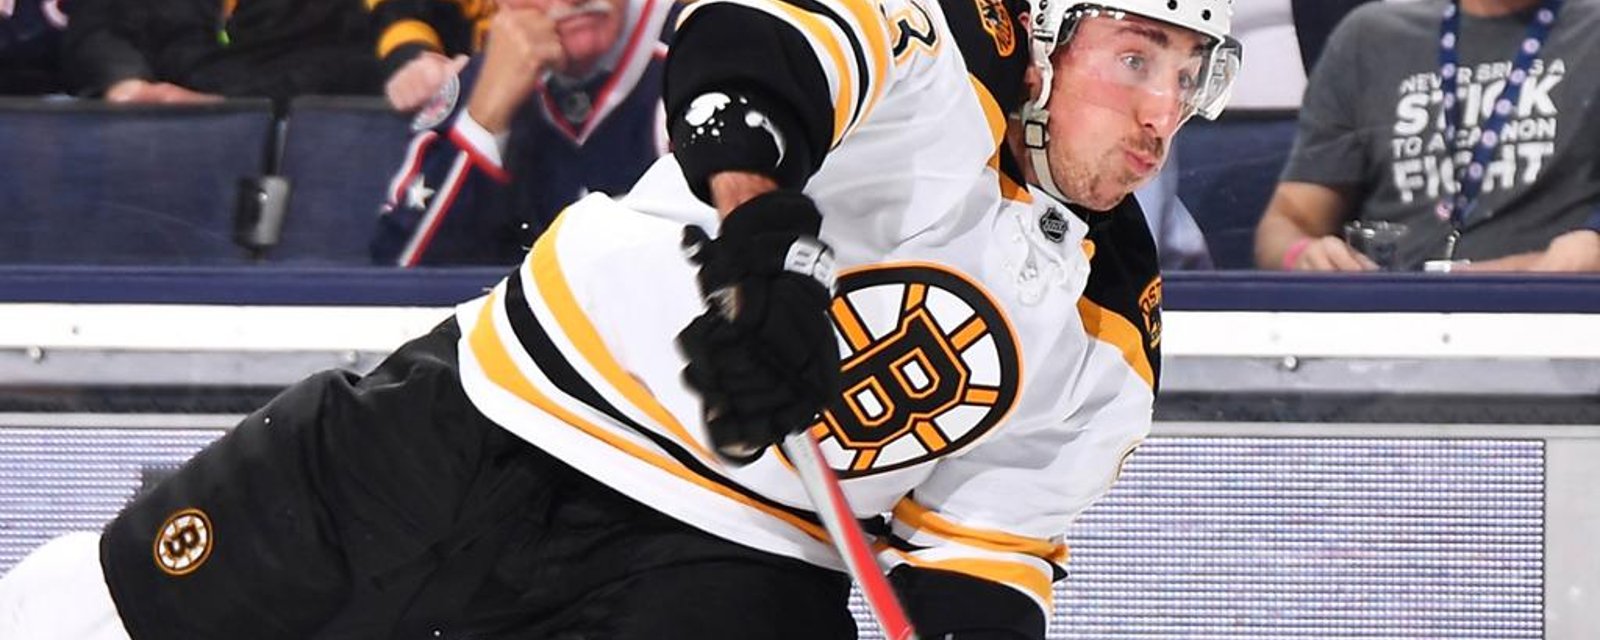 Fans are outraged with NHL following Marchand's performance last night